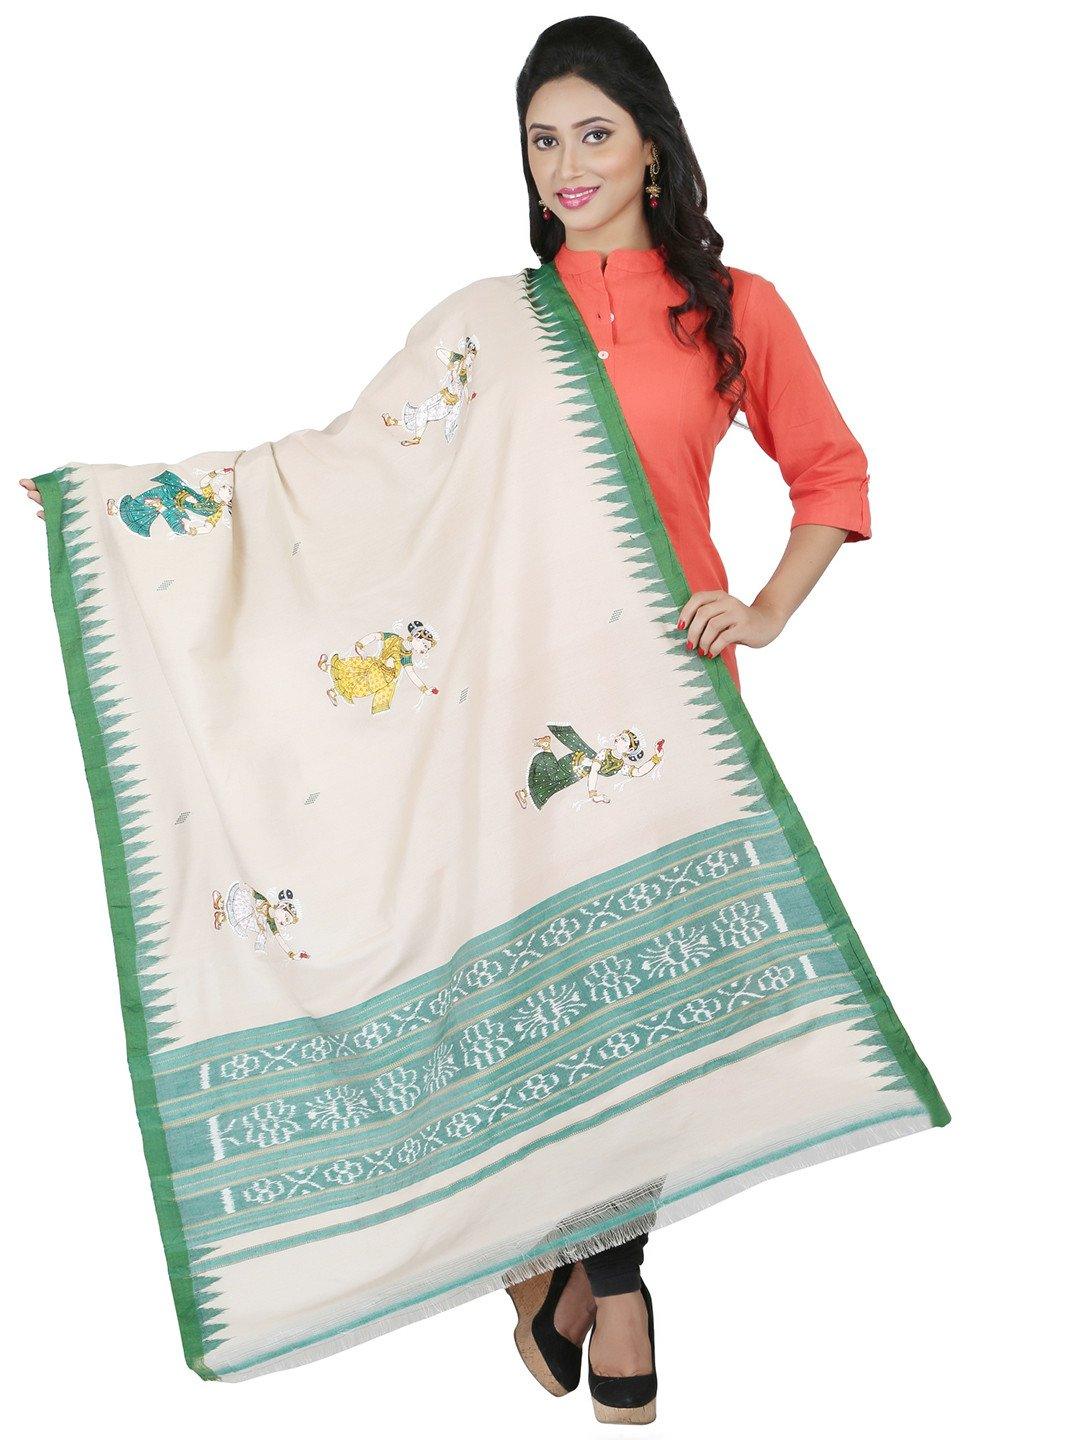 CraftsCollection.in - Beige Tussar Silk Dupatta with Hand Painted Pattachitra Art